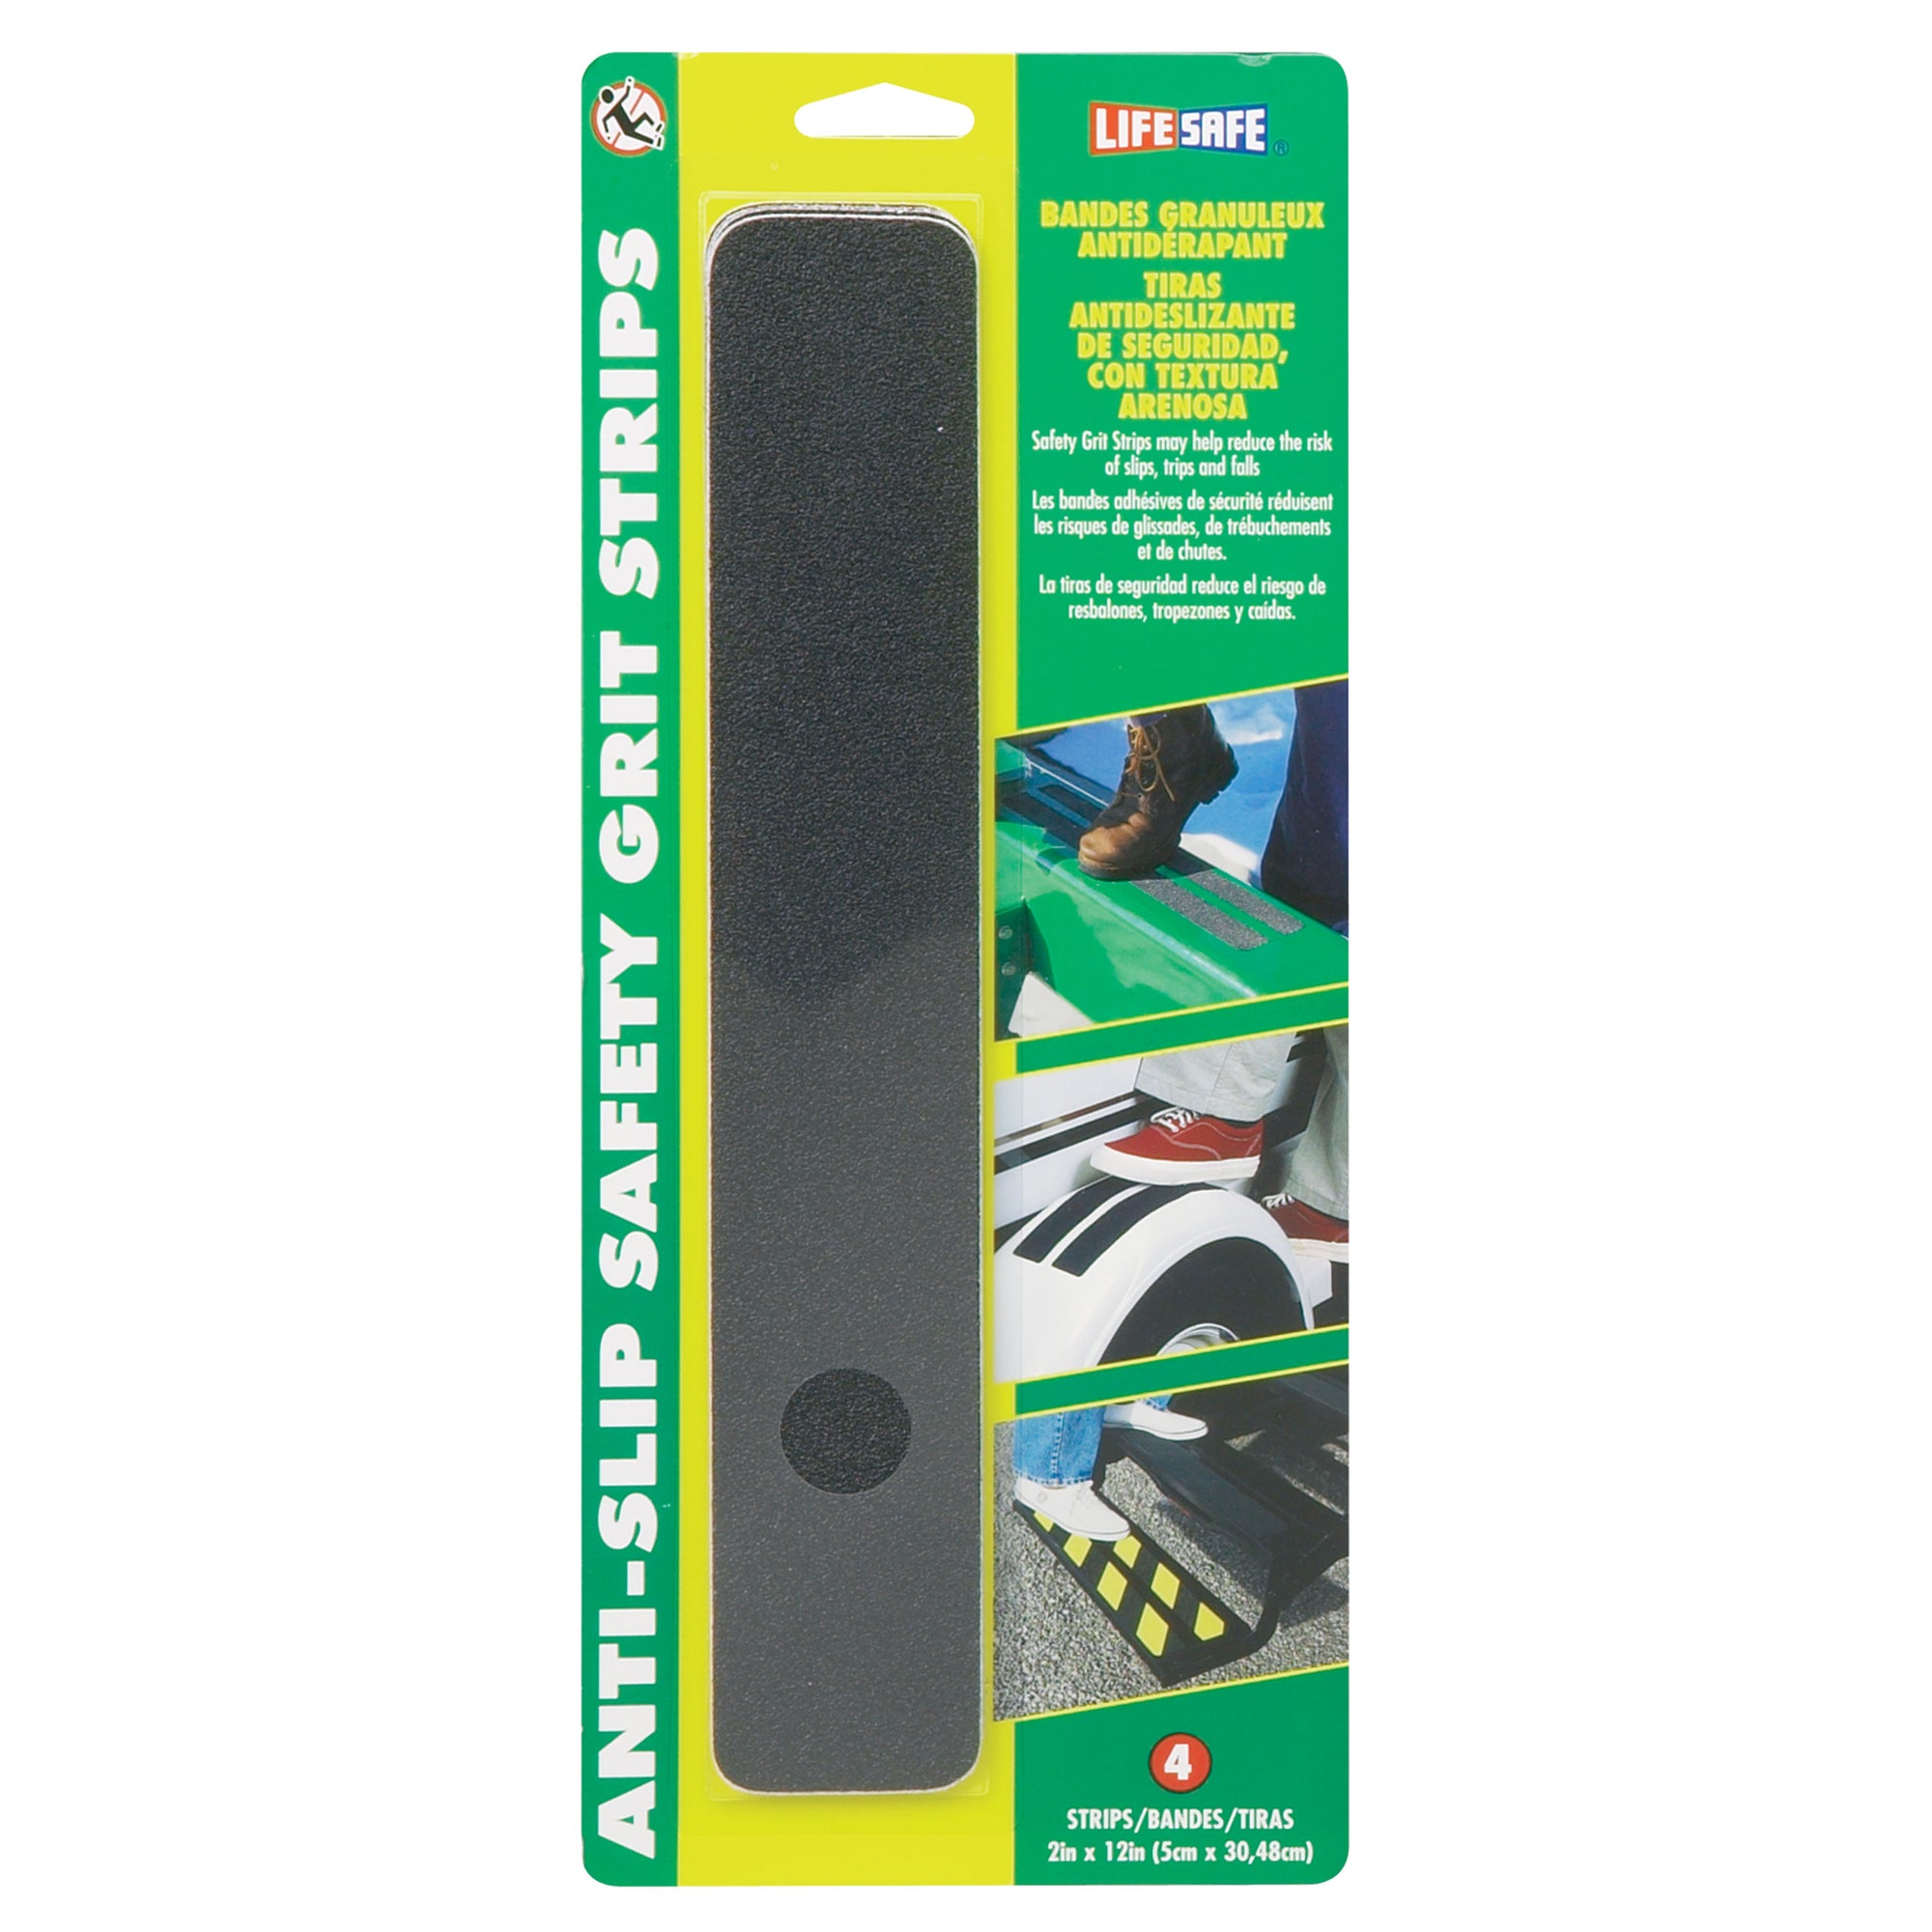 Life Safe RE3950 Anti-Slip Safety Grit Strip - 1 in. x 15 ft. Roll